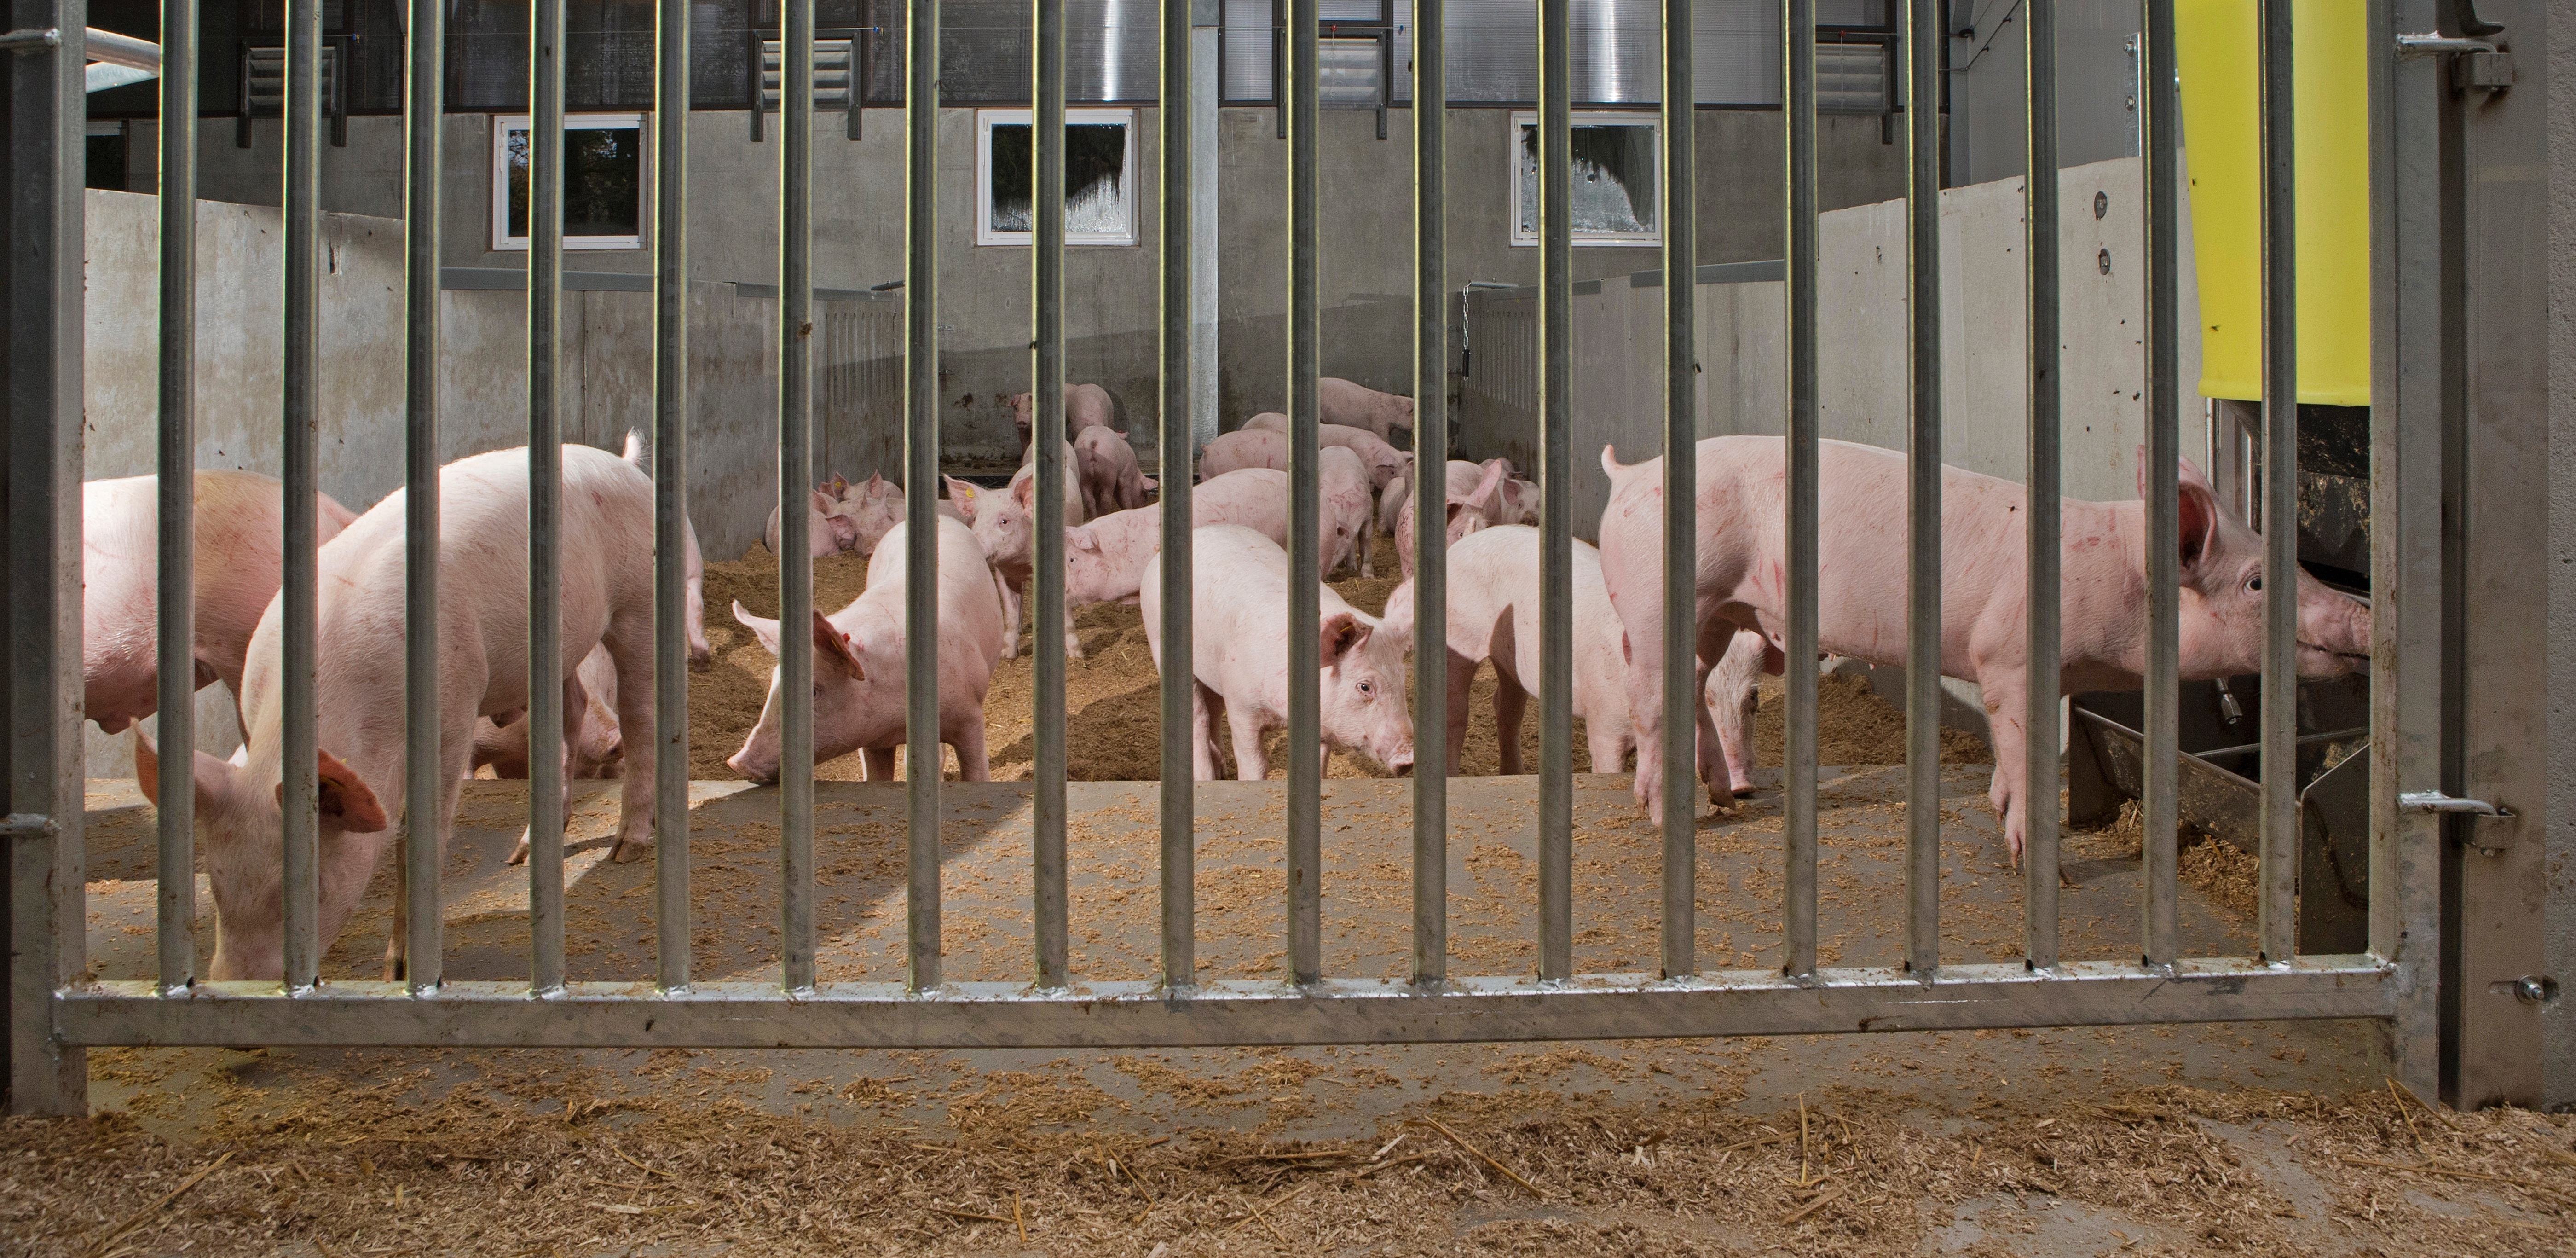 pigs housed indoors investigating their pen